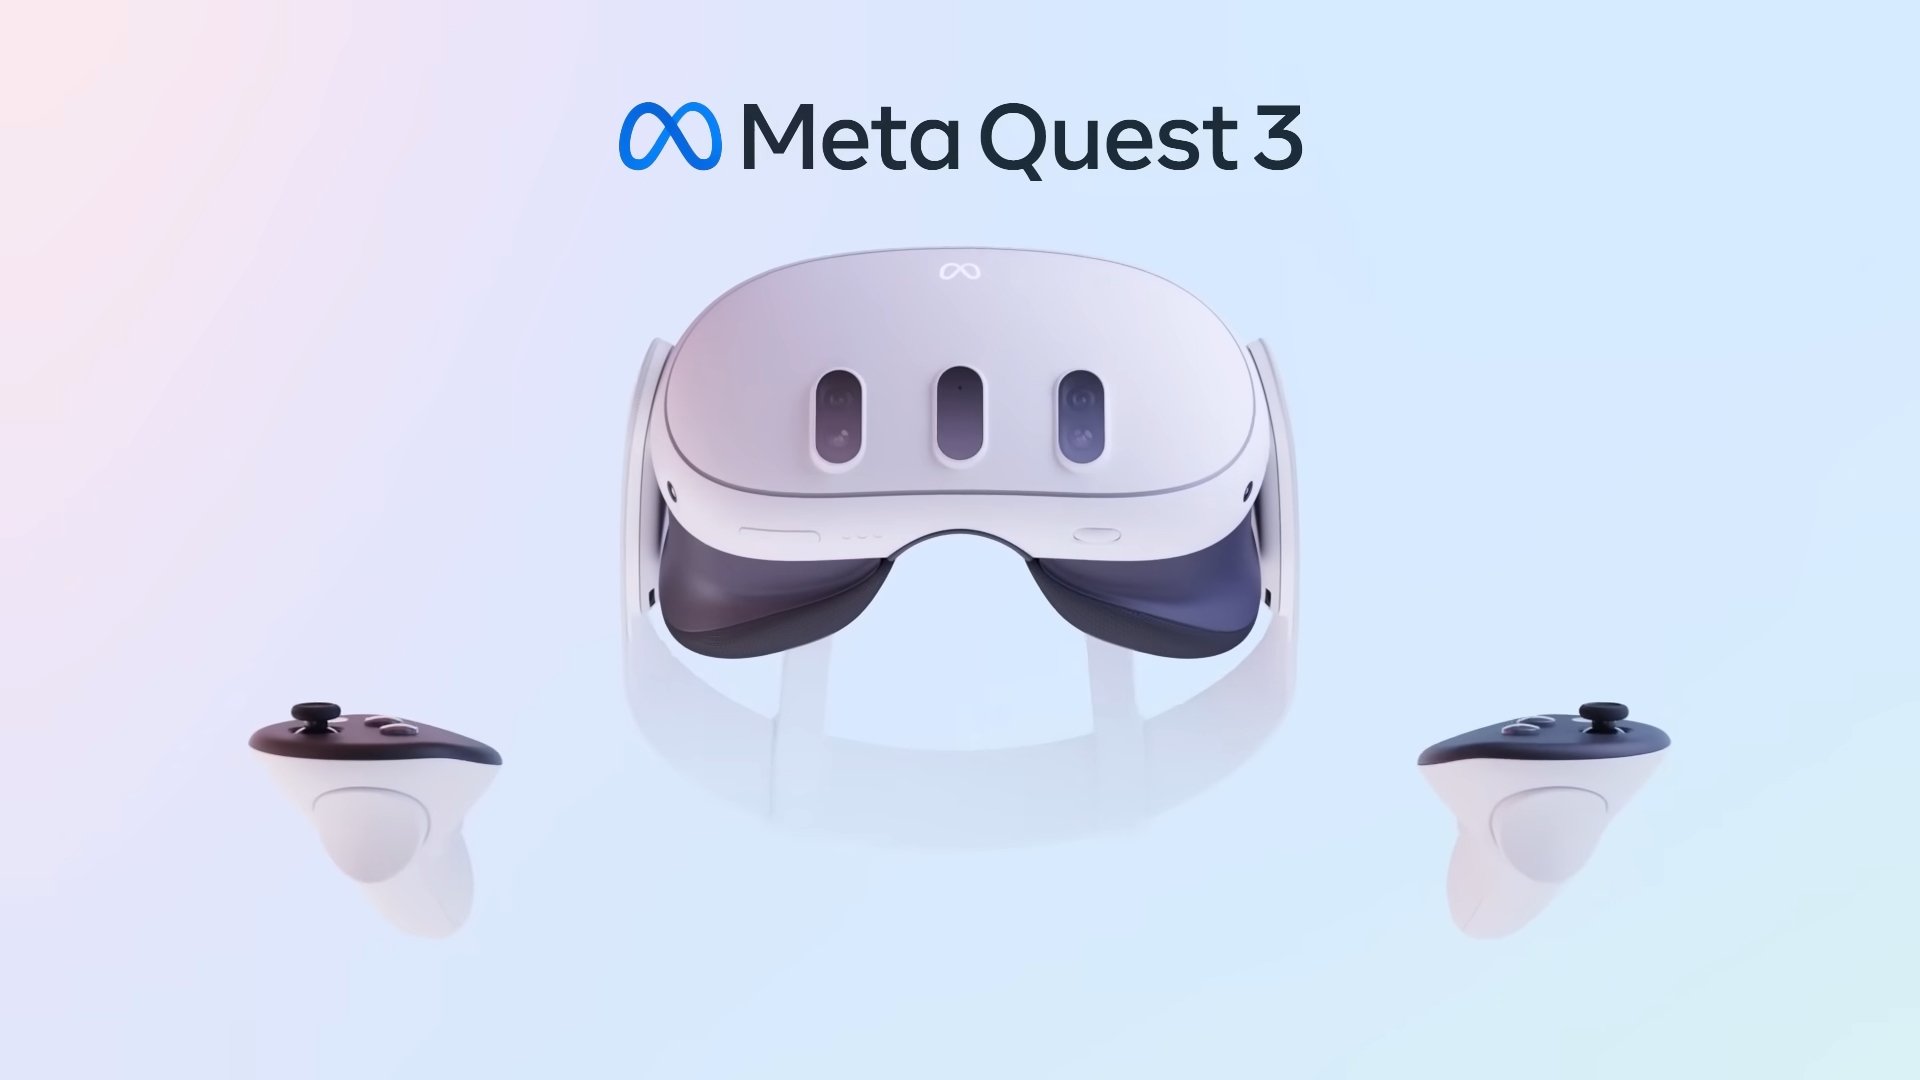 Meta Quest 3 review impressions - one of VR gaming's best options